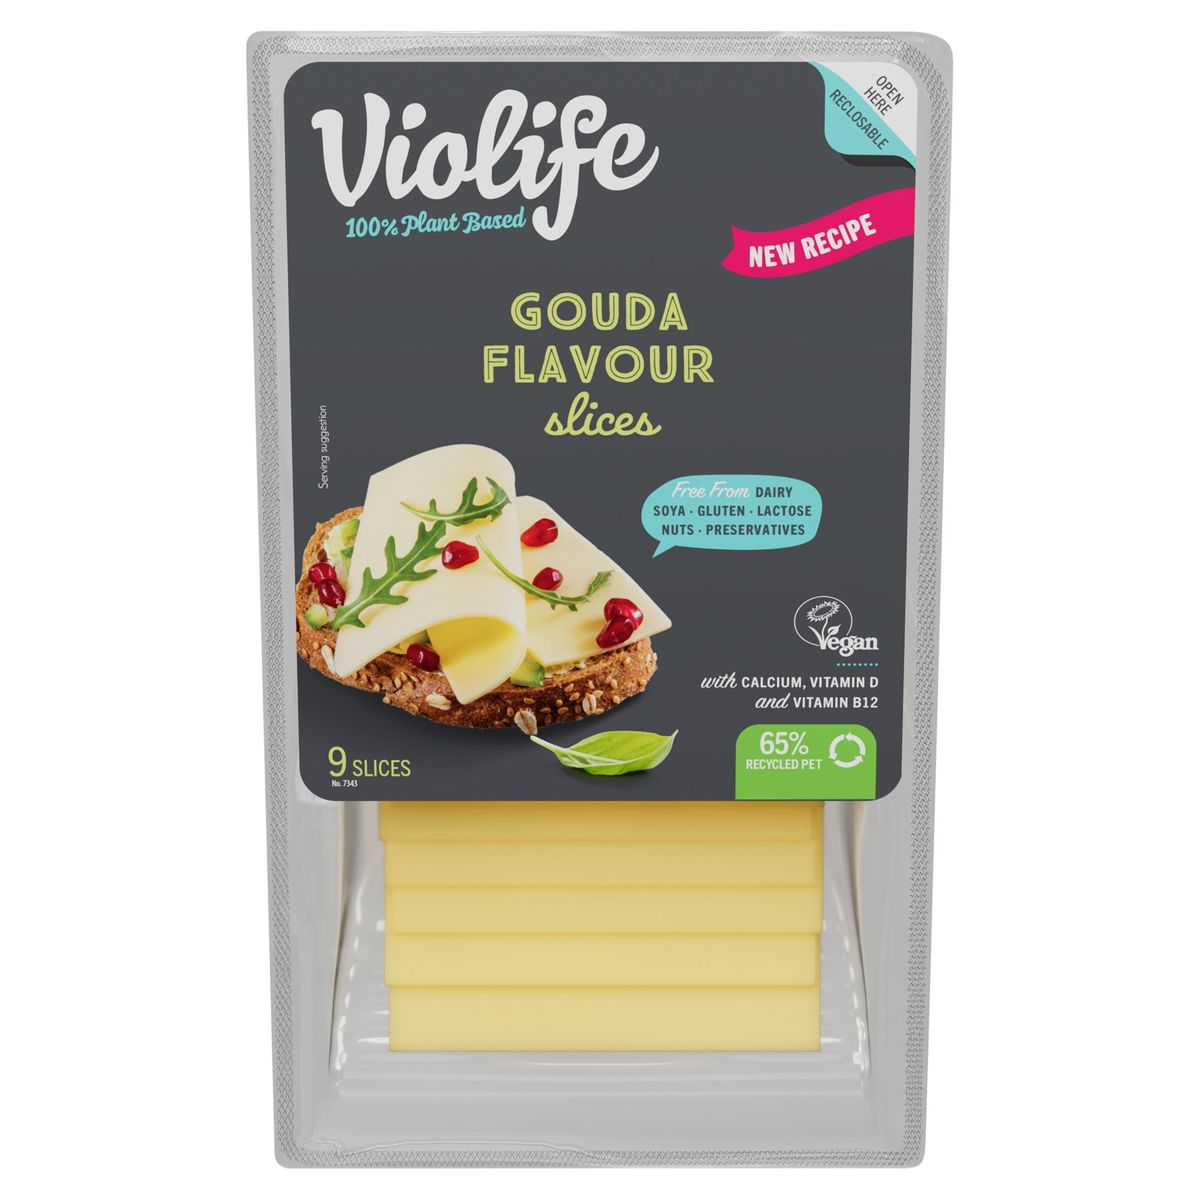 Violife Gouda Flavour Slices 9 Tranches 140 g